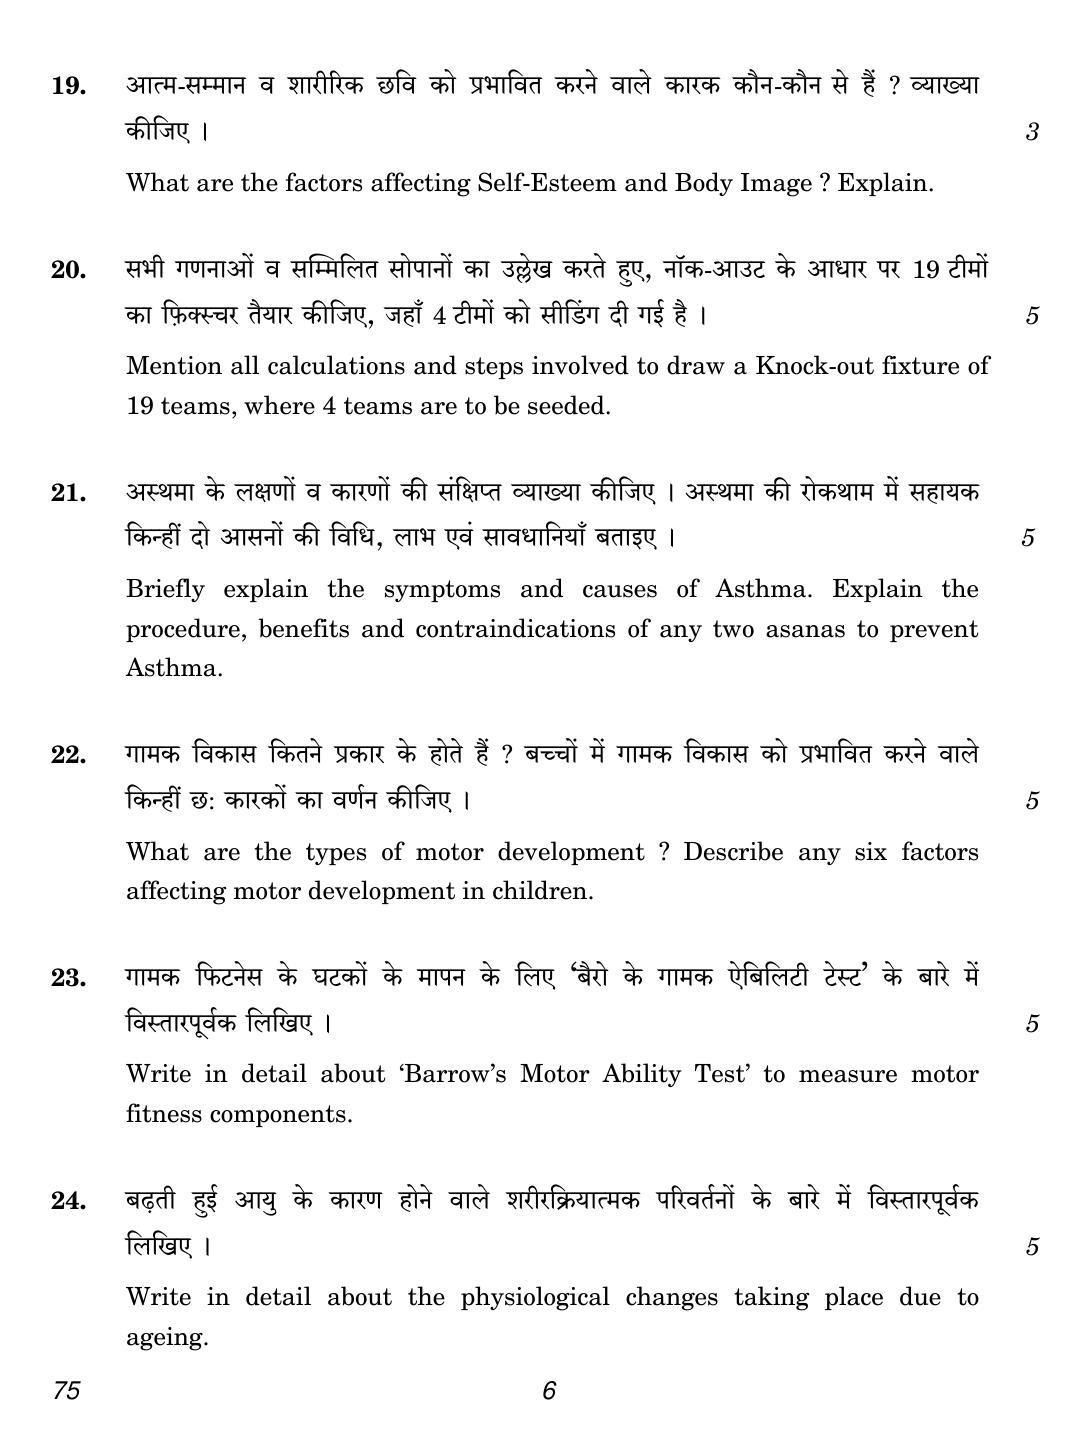 CBSE Class 12 75 Physical Education 2018 Question Paper - Page 6